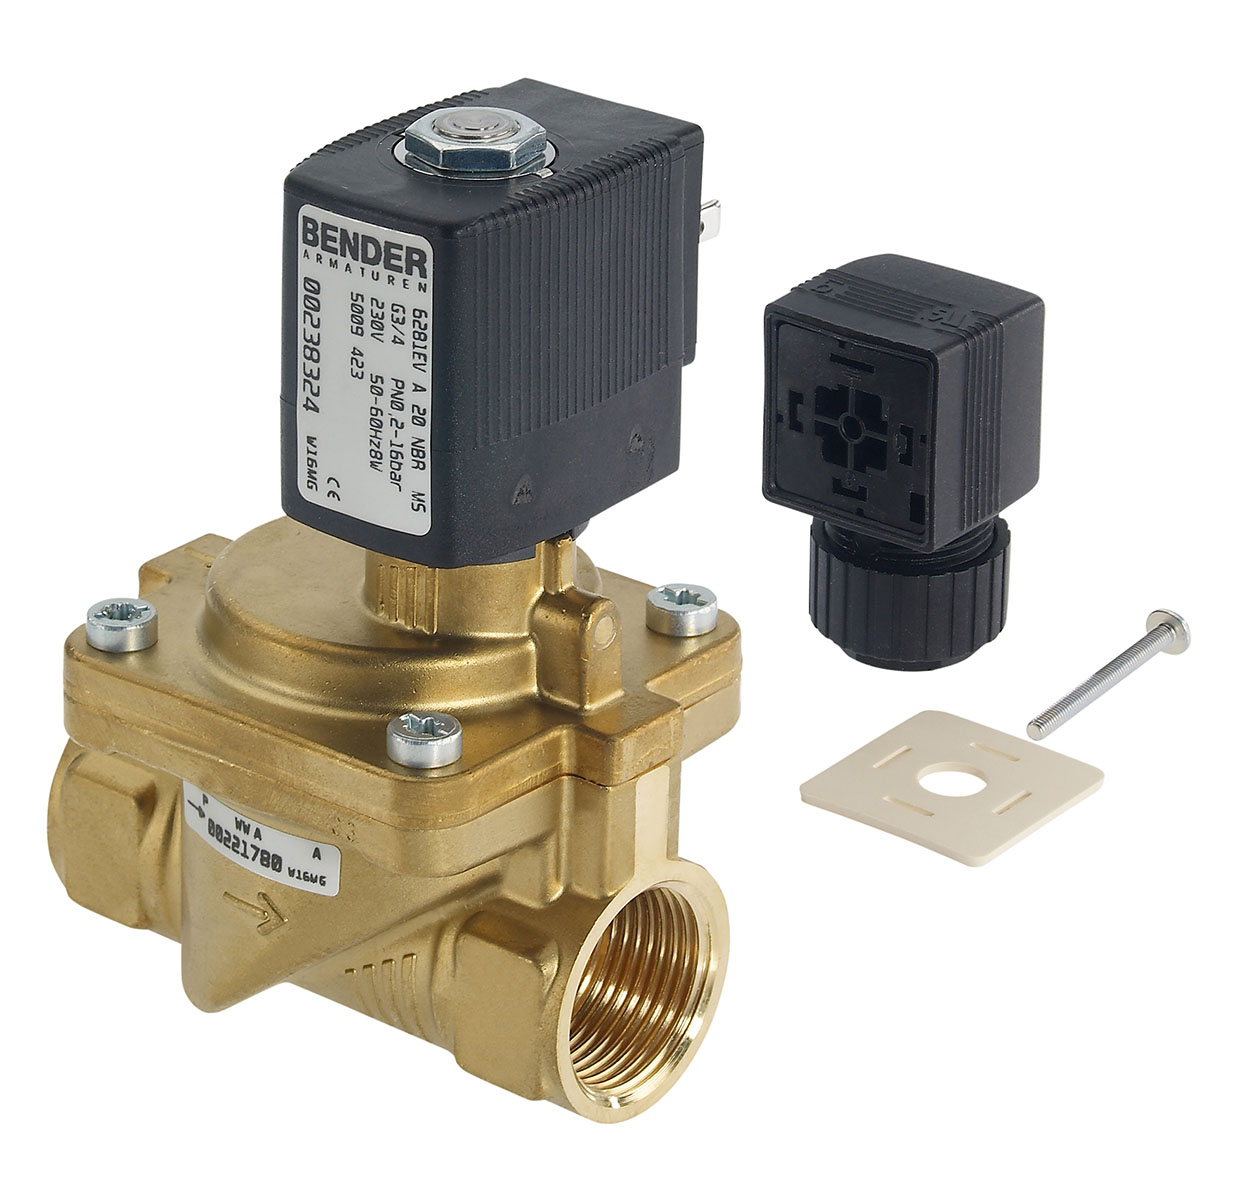 5009807 - 2/2 way solenoid valve normally closed for fluids Type 8; female thread